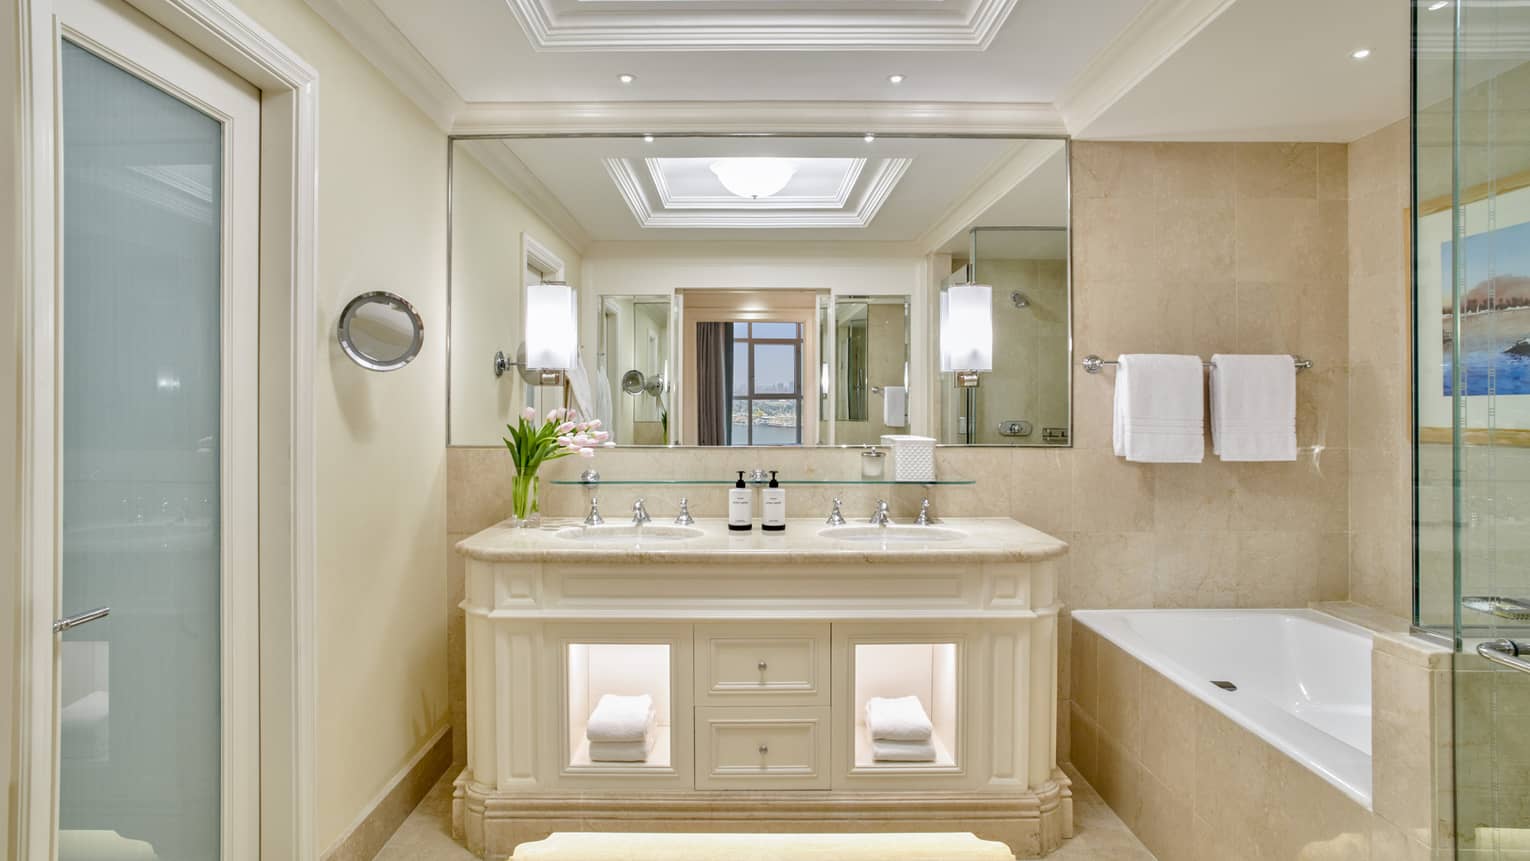 Guest bathroom with double vanity, full-width mirror, large soaking tub and glass shower